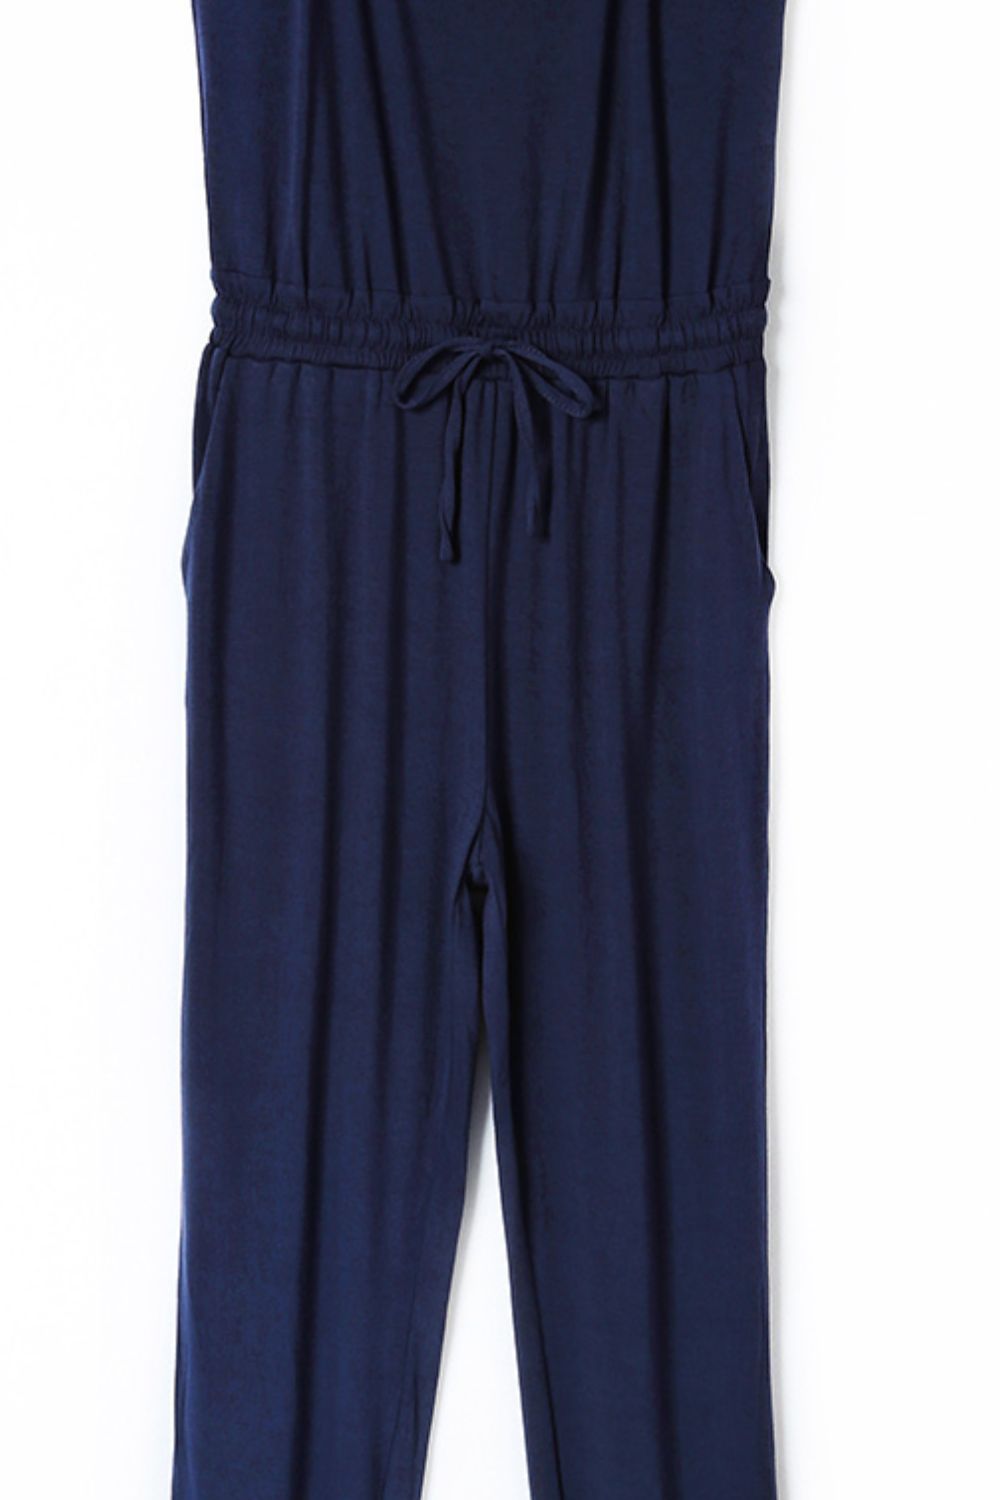 Spaghetti Strap Jumpsuit with Pockets  Sunset and Swim   